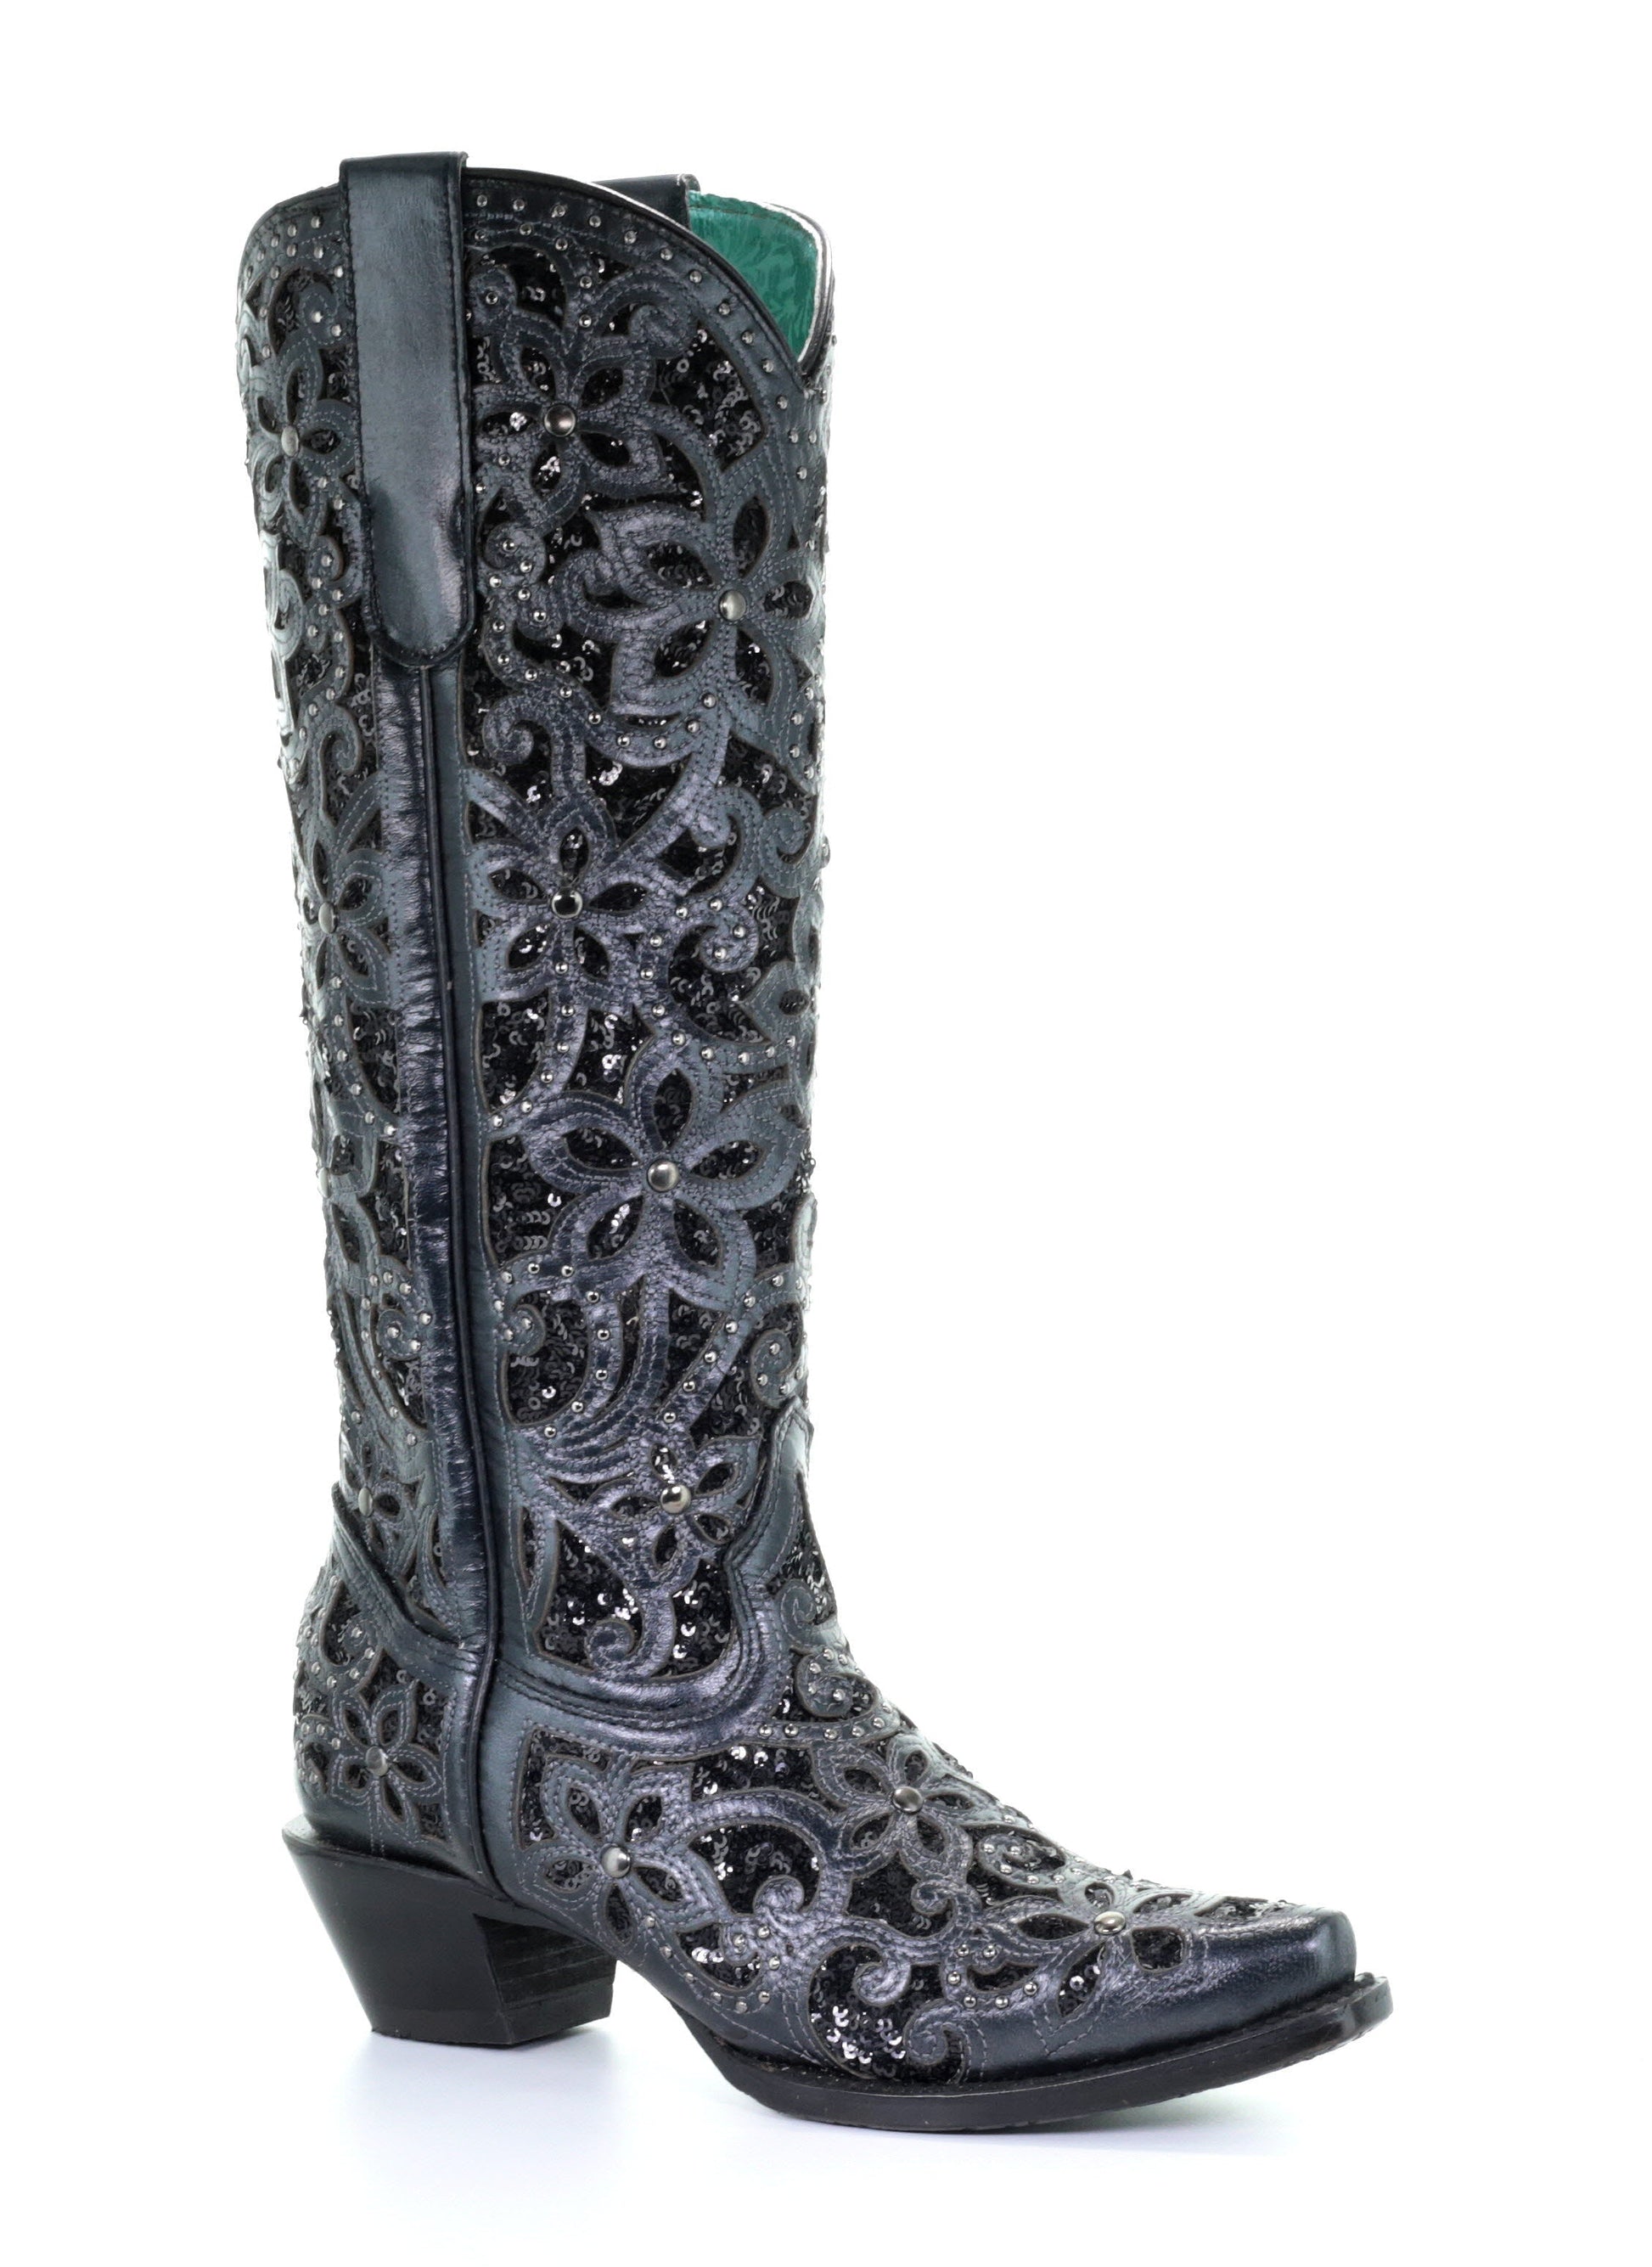 A3589 - Corral black western cowgirl leather sequins knee-high boots for women-Kuet.us